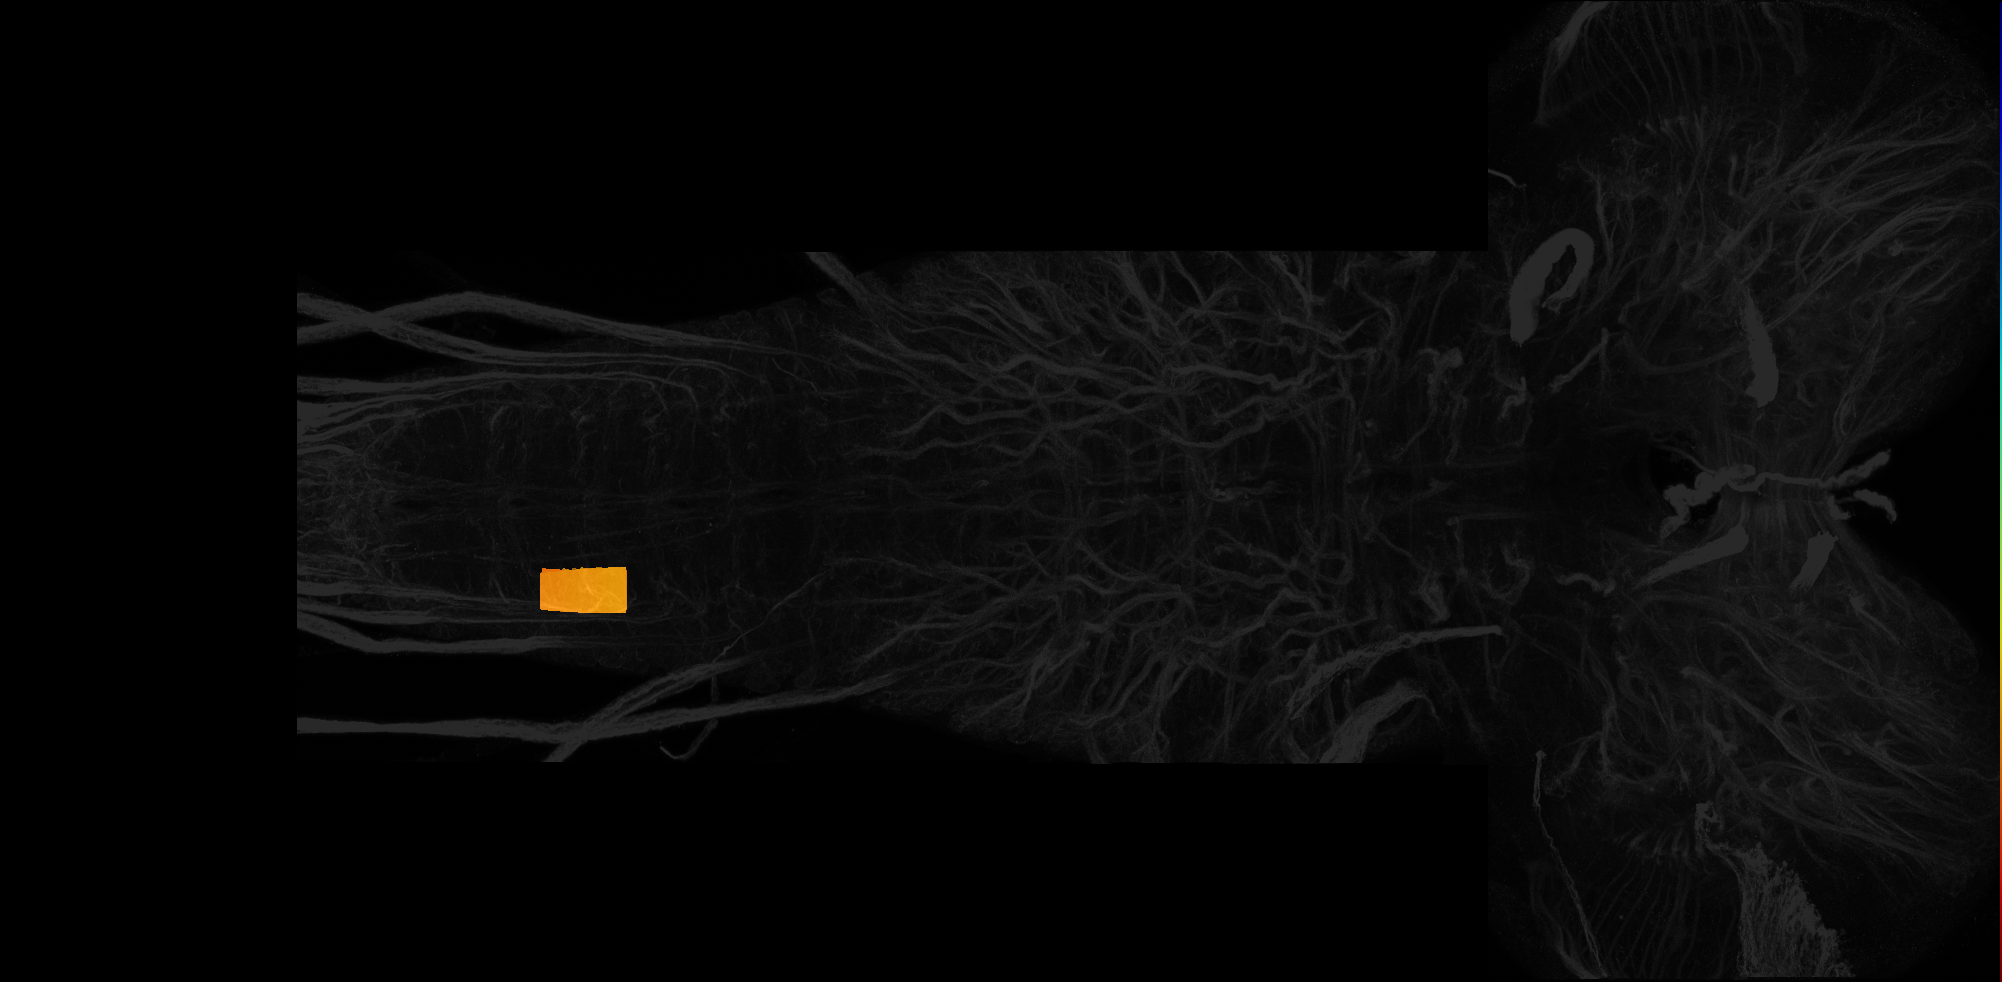 right centrolateral neuropil of A6 on L3 CNS template, Wood2018